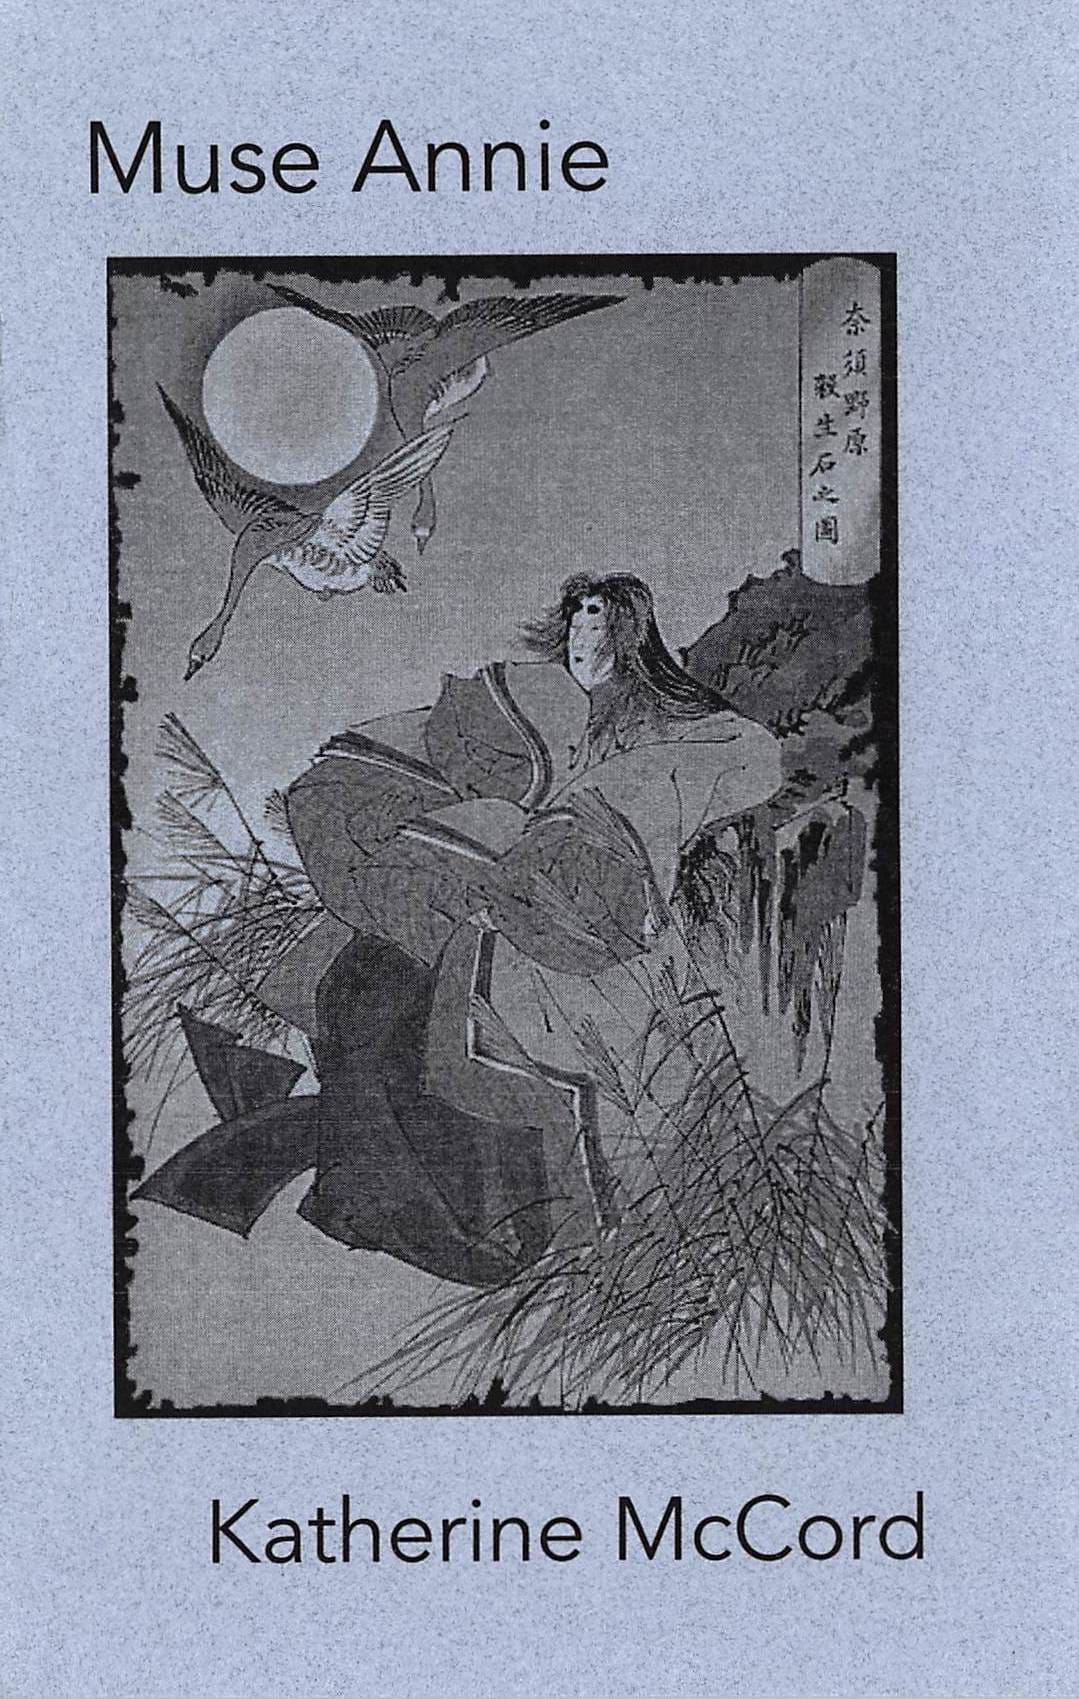 book cover of Muse Annie that is a Japanese woodblock print of a woman and 2 flying swans